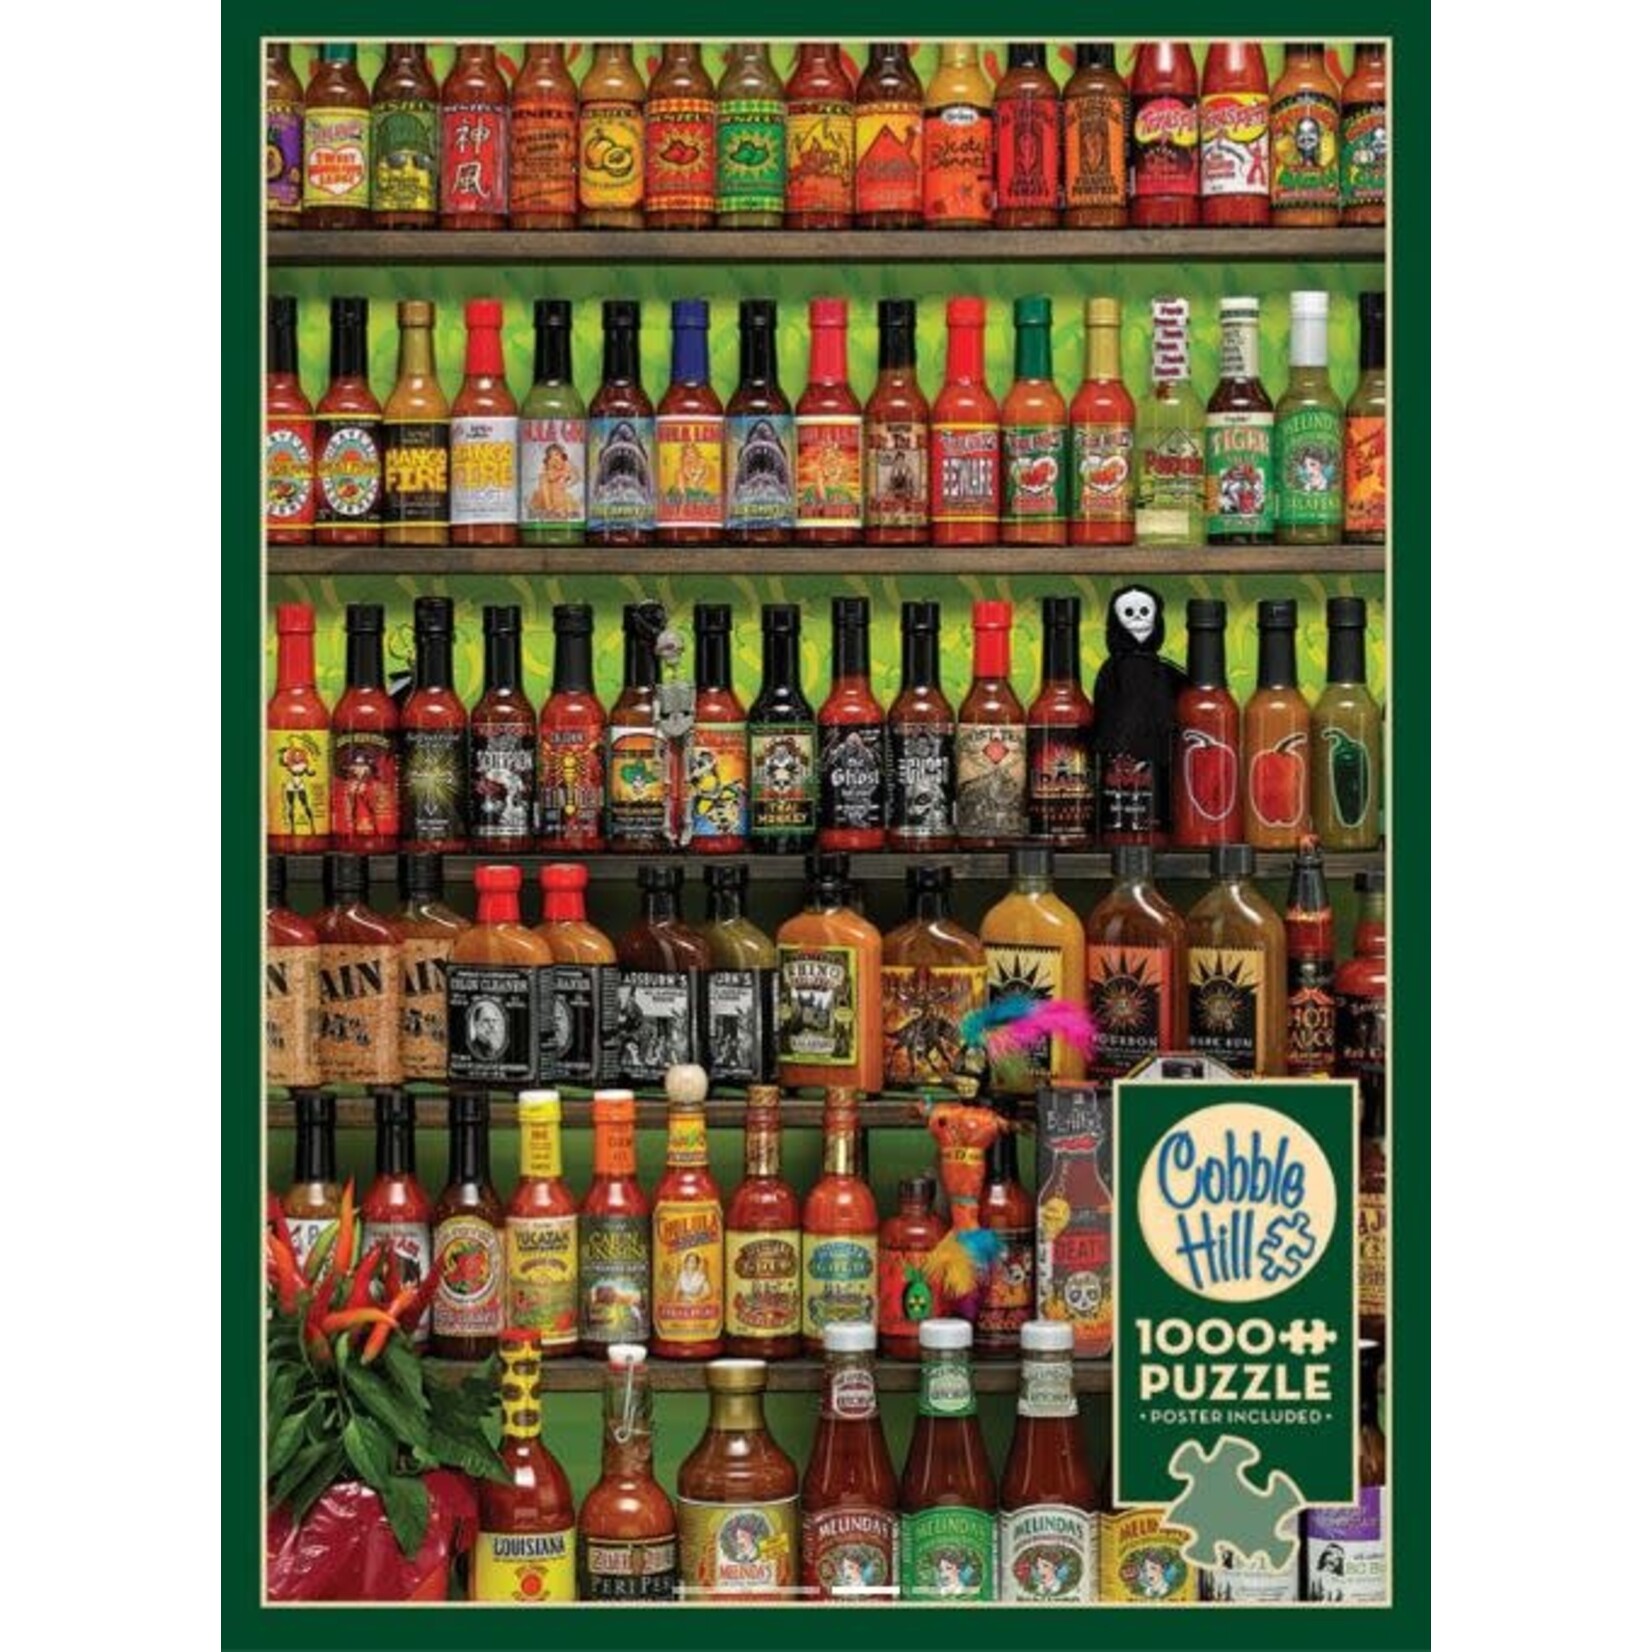 Cobble Hill Hot Hot Sauce Collage Type Puzzle (1000pc)